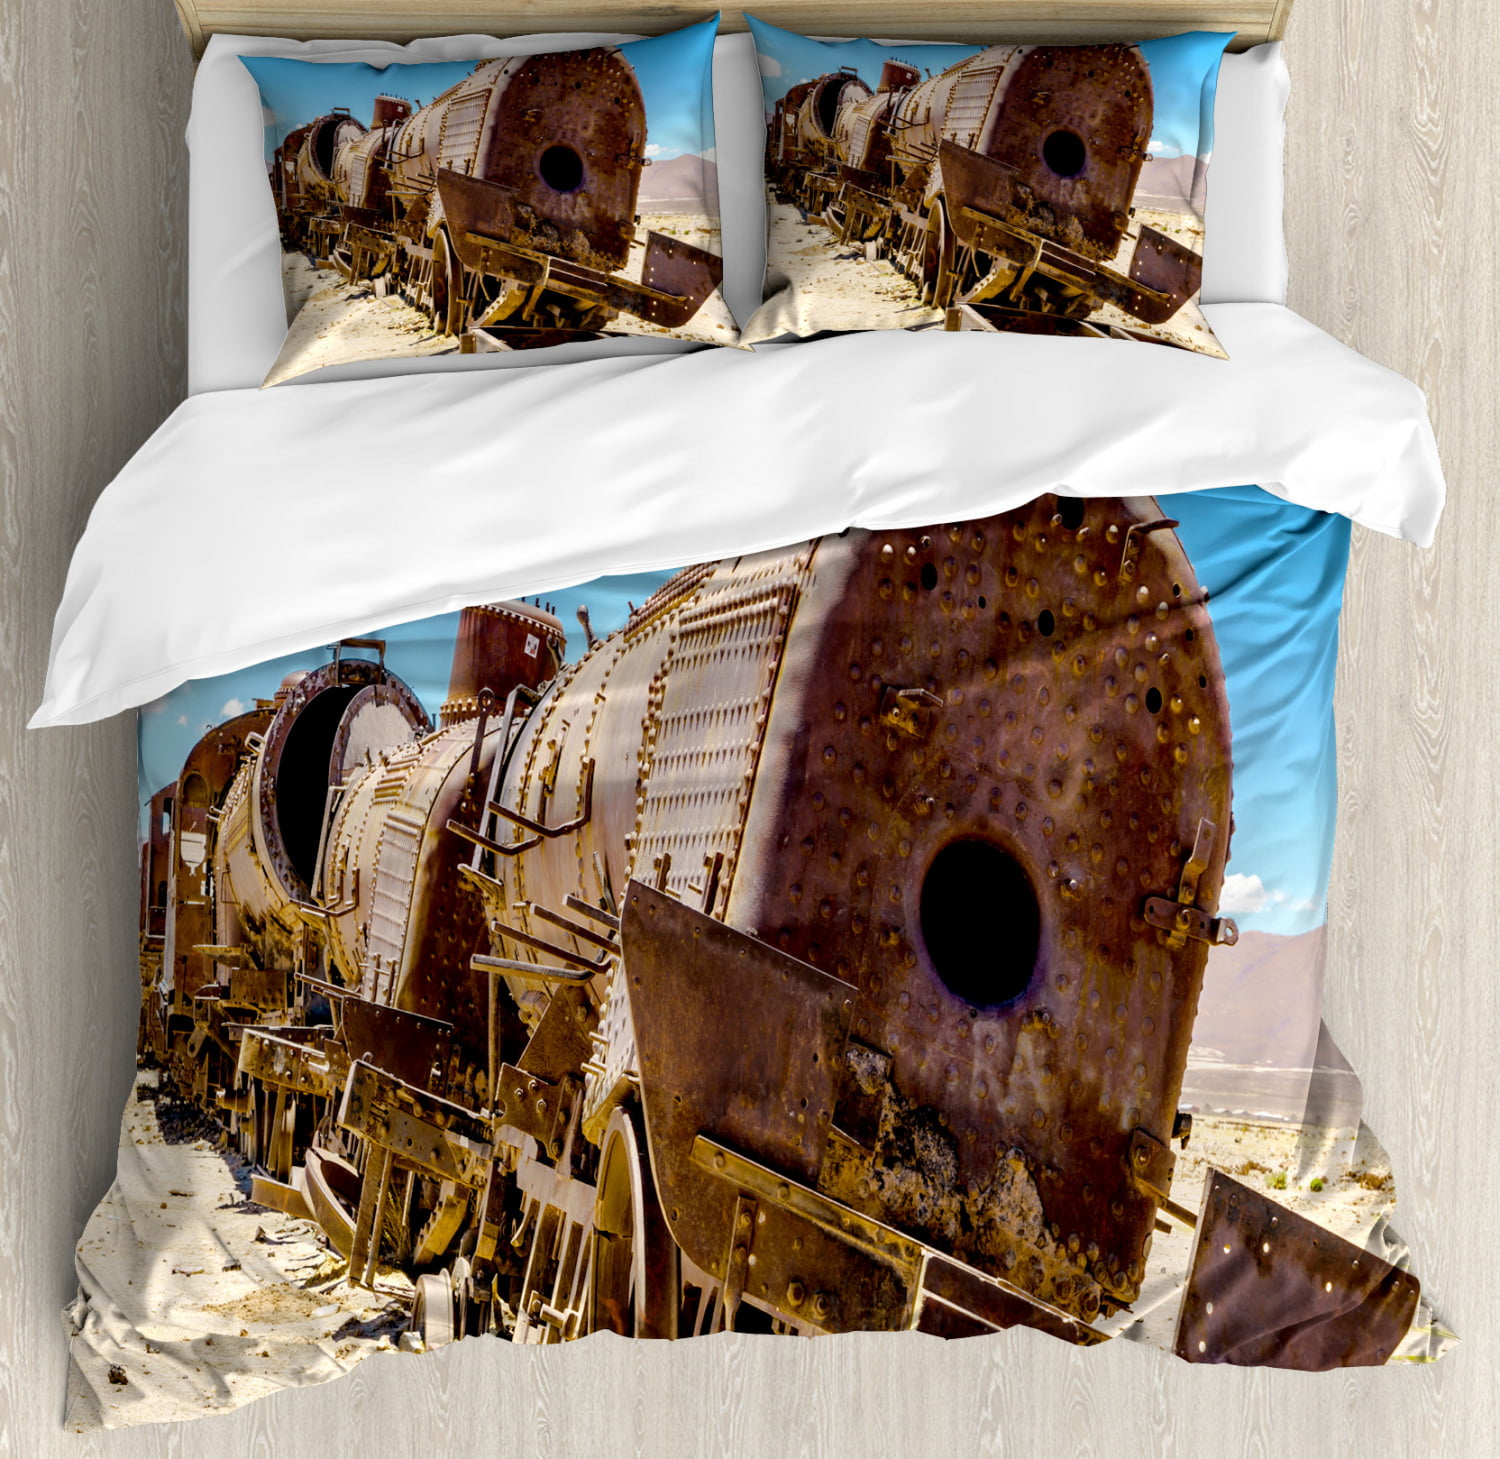 Beddings Style Reversible Print Rustic Old Train 3-Piece 100% Cotton Bedding Set: 1 Duvet Cover and 1 Pillow Shams No Comforter Insert California King Quilt Cover Size